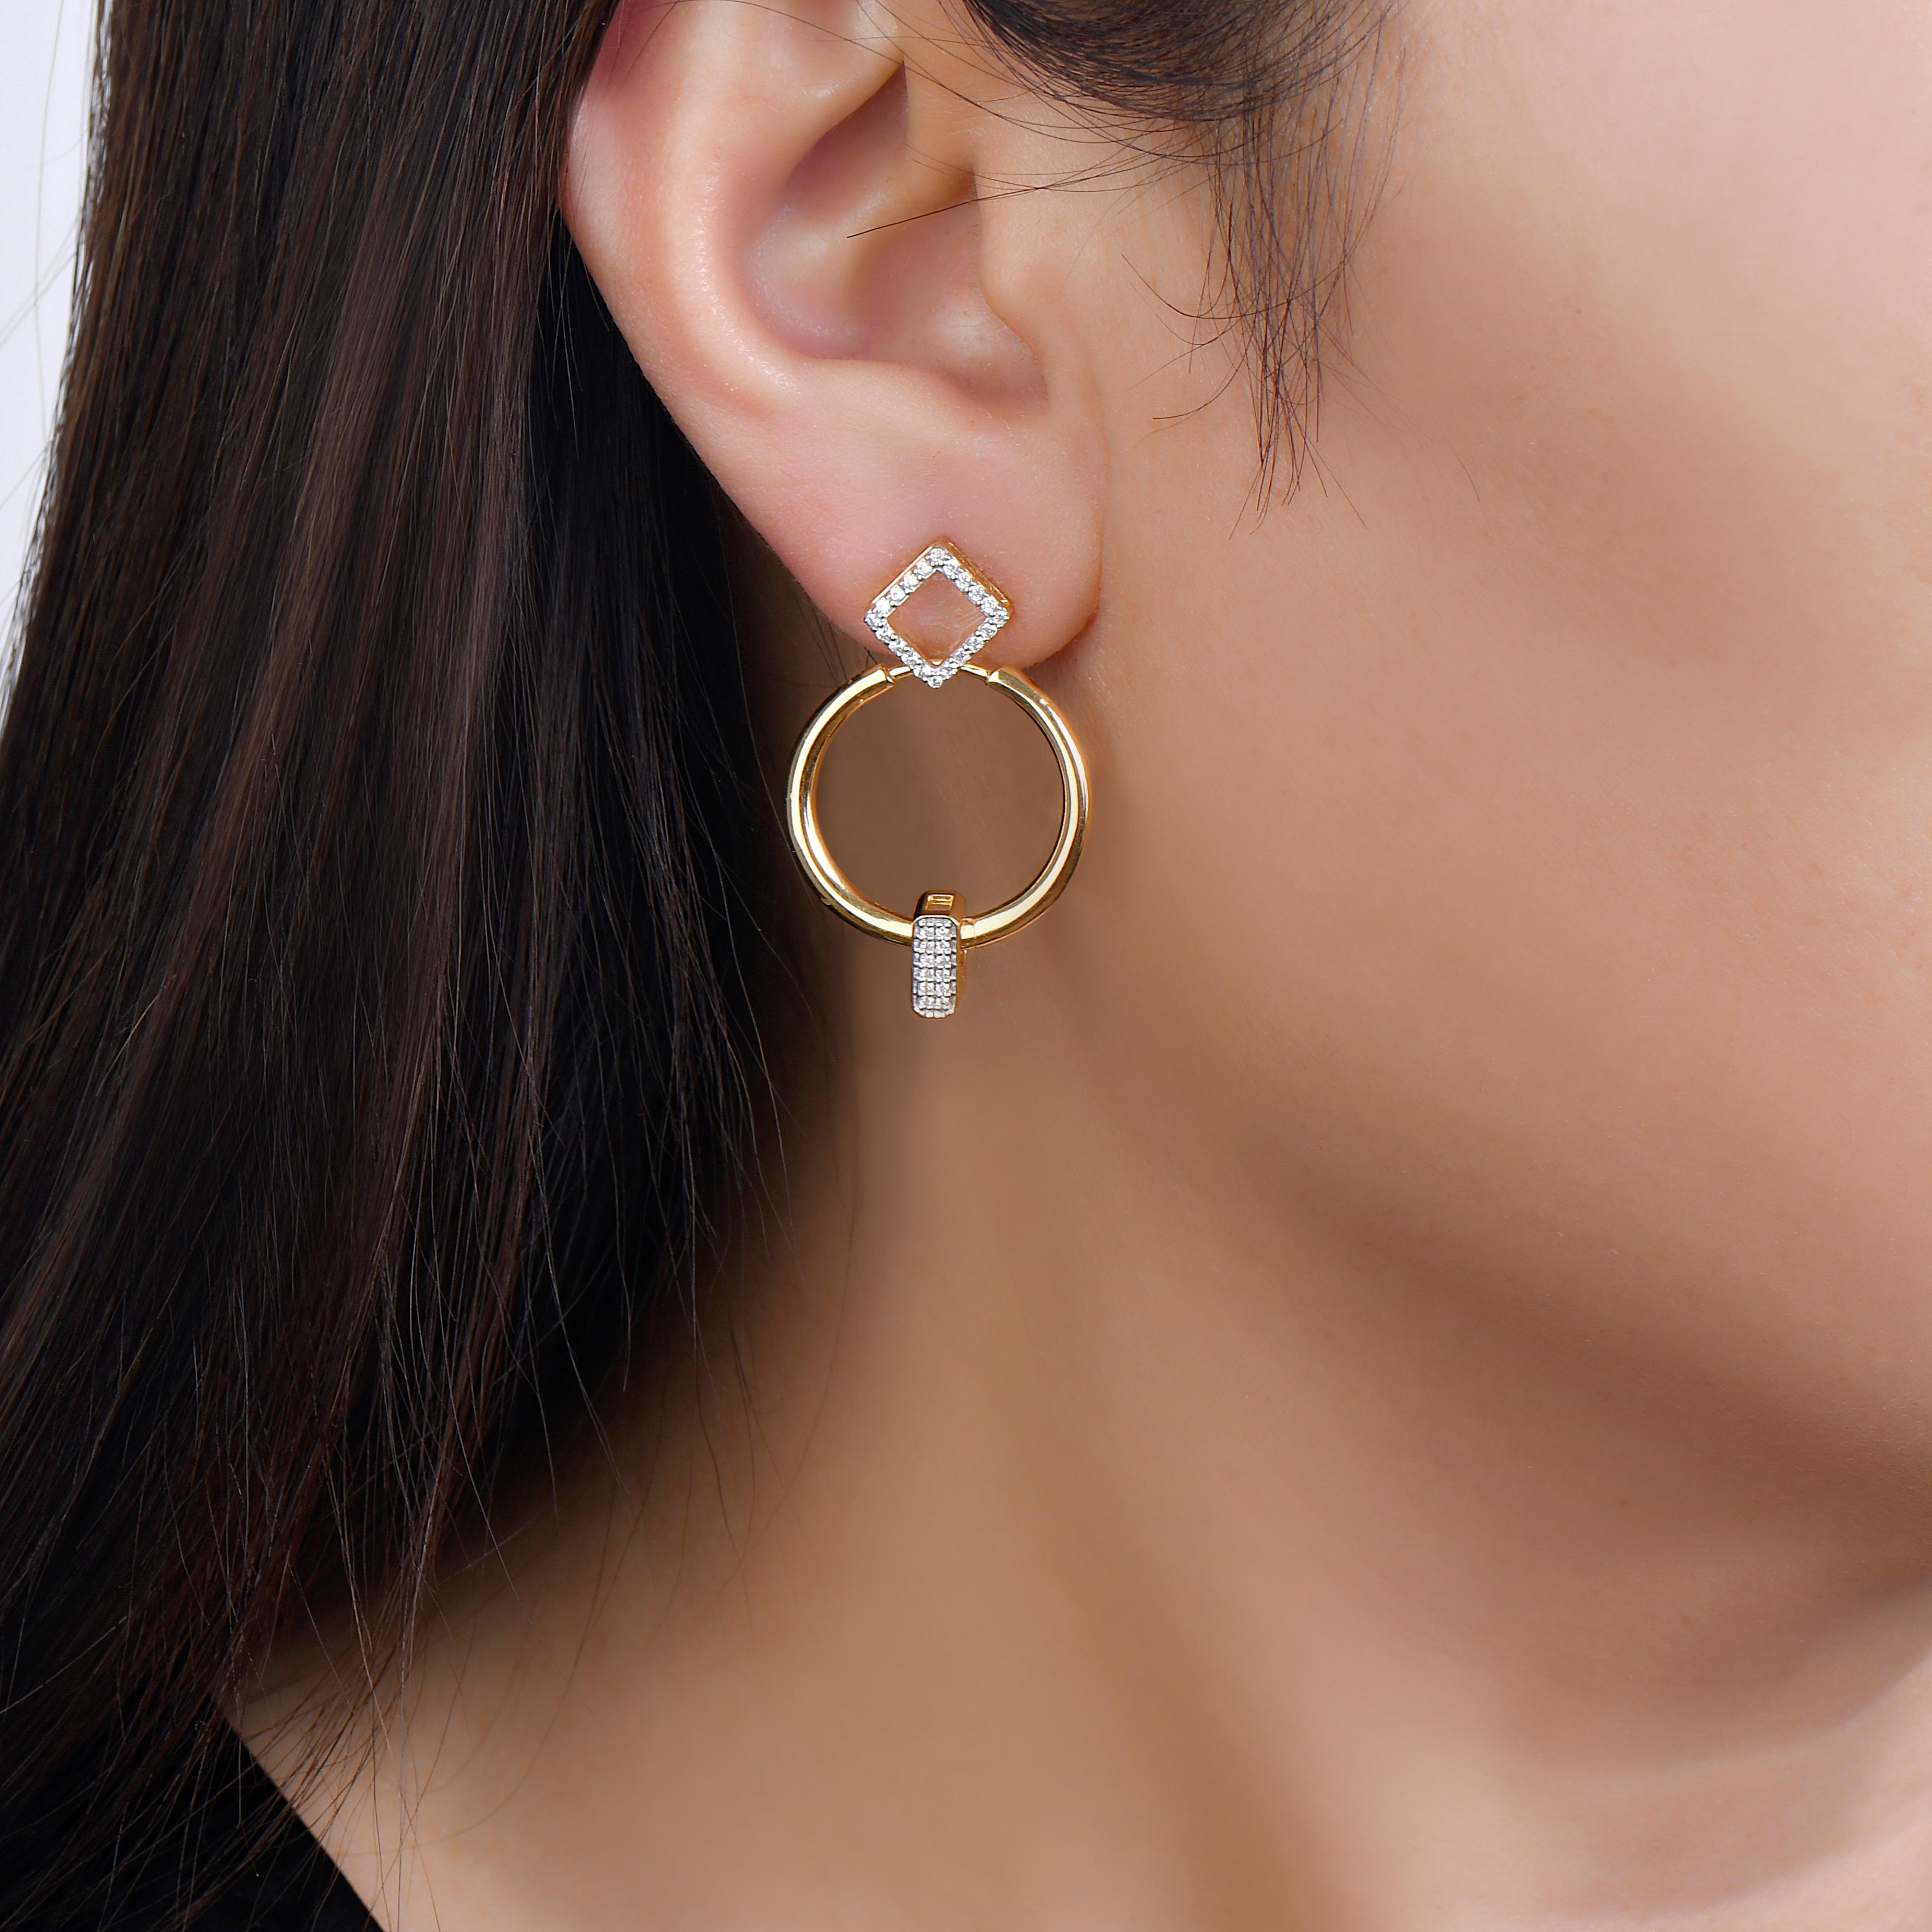 Arguably our most versatile jewelry design in our collection, the Connection Diamond Detachable Earrings are a guaranteed conversation starter as a whole but a standout when separated. Get 4 in 1 with these statement earrings. Wear it as is or you